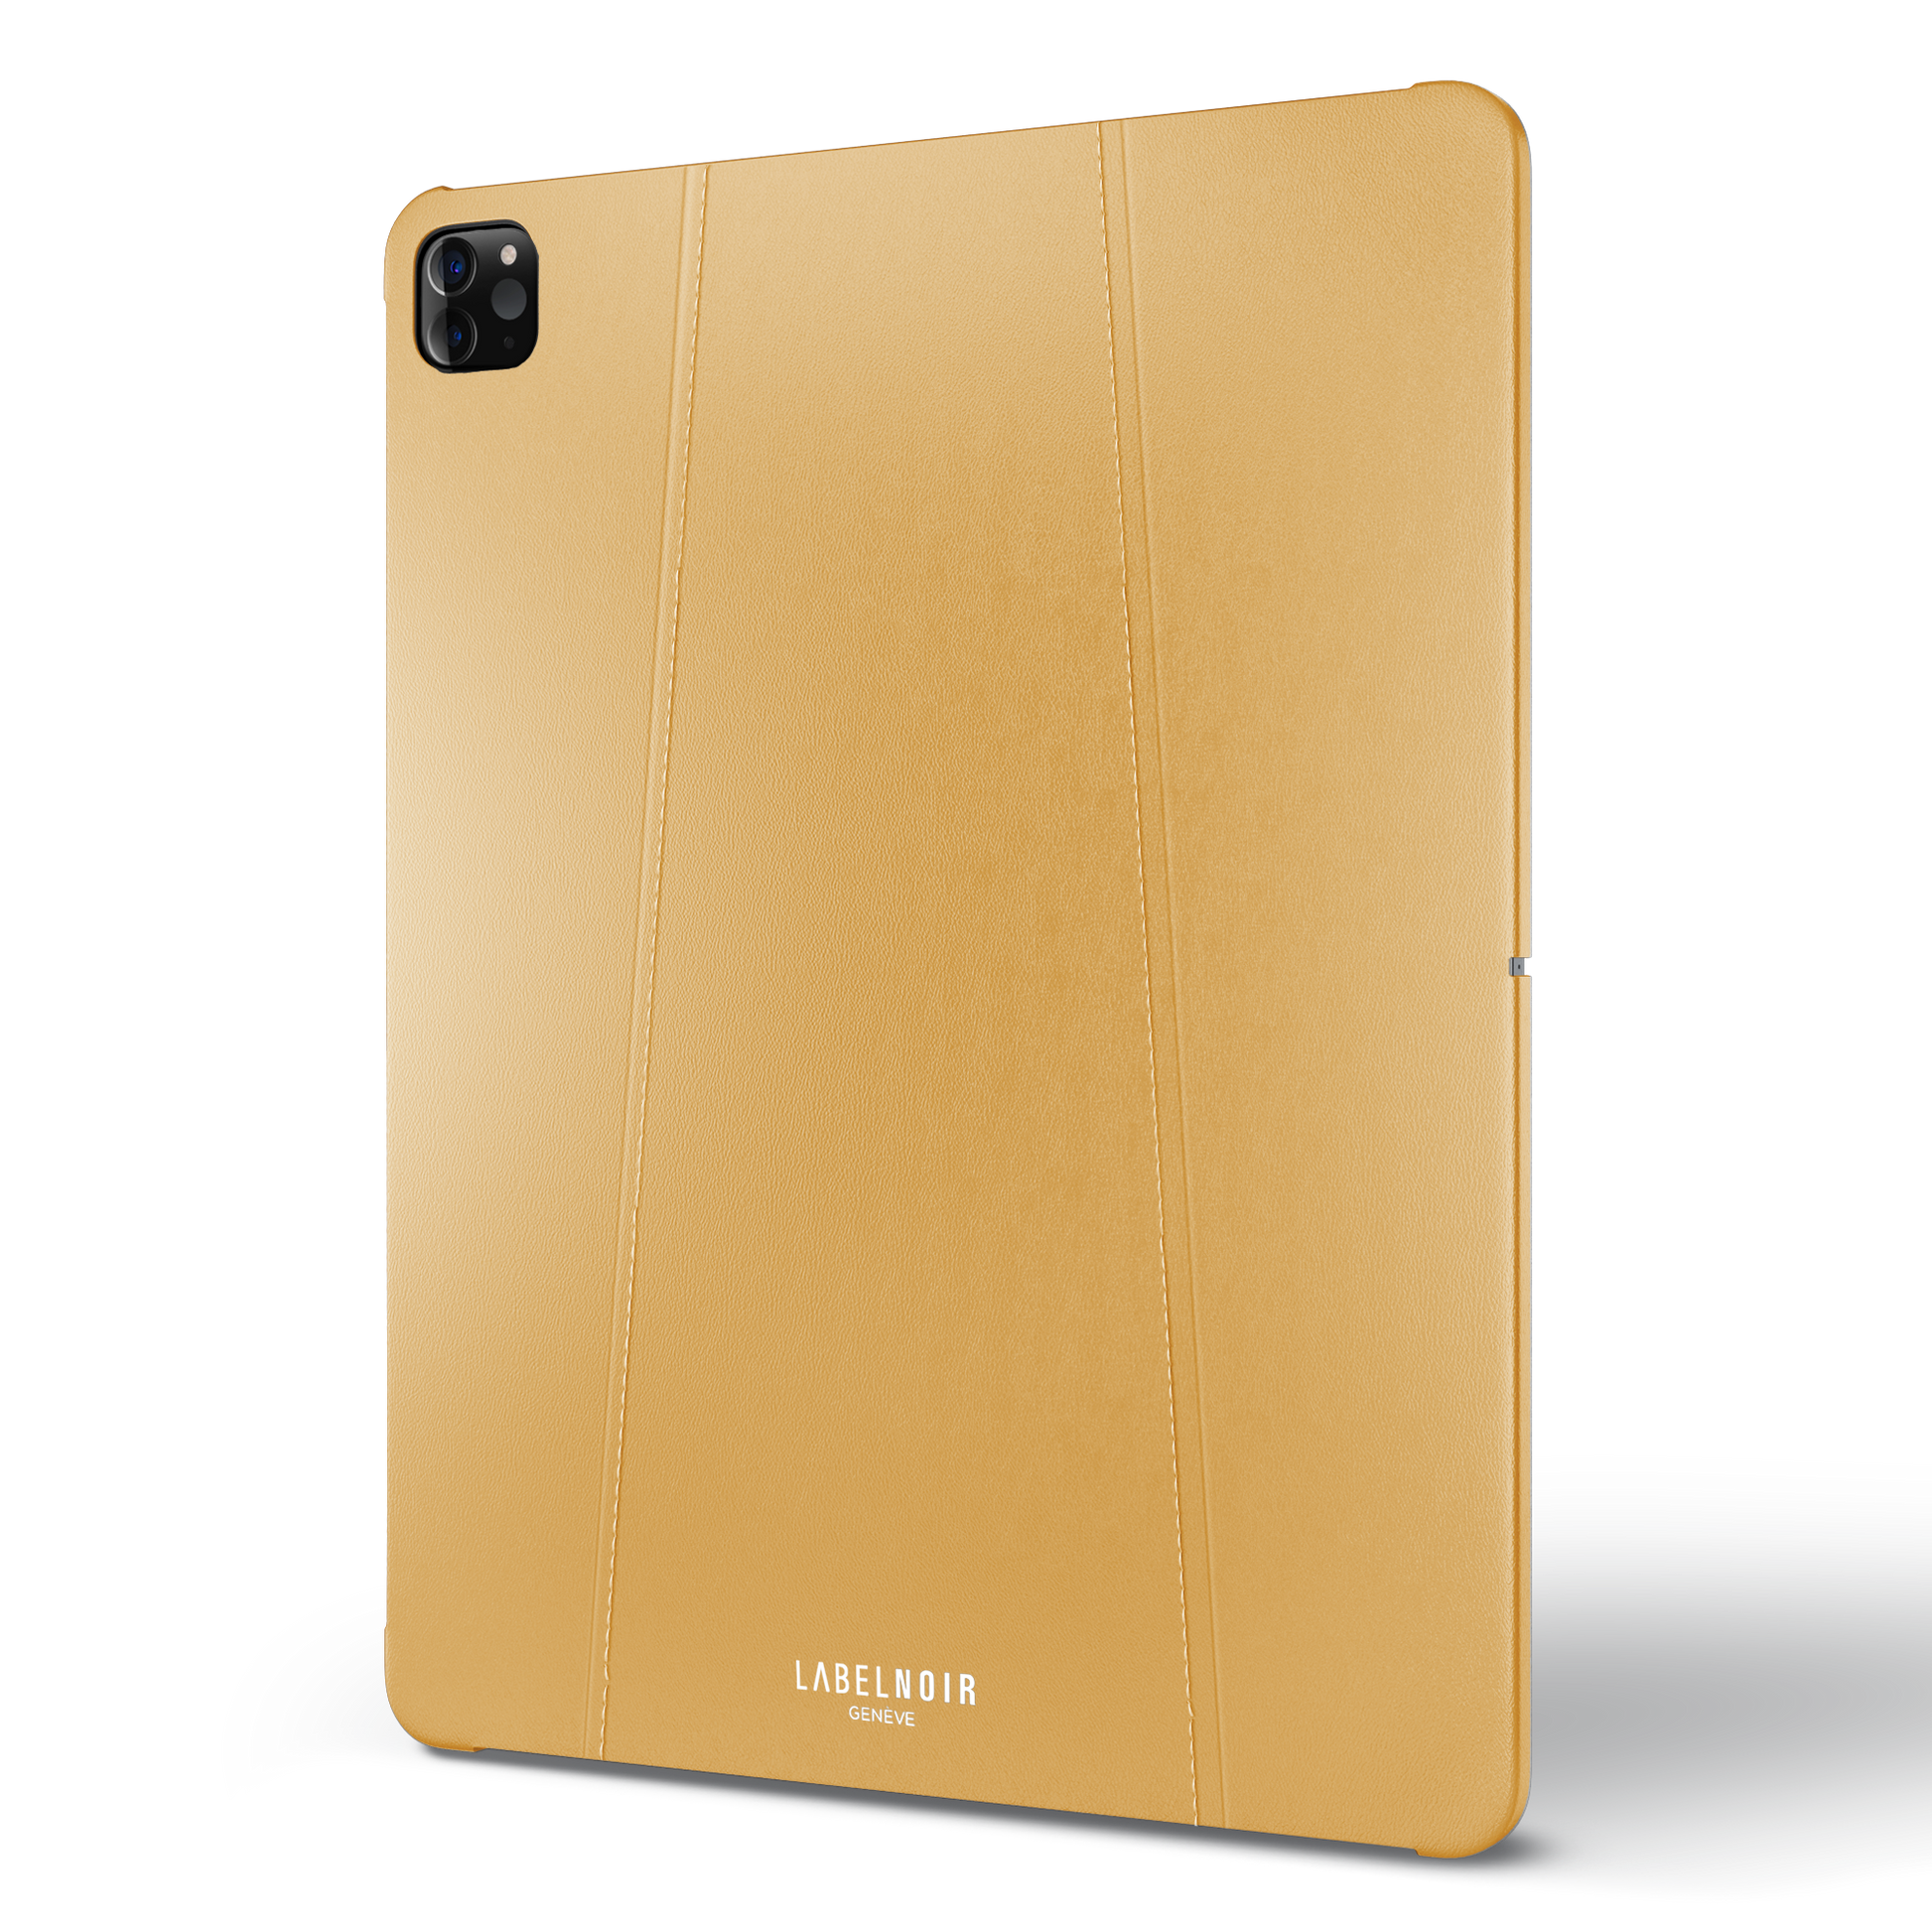 Ipad Pro (6th Gen) 12.9-inch Yellow Leather Case